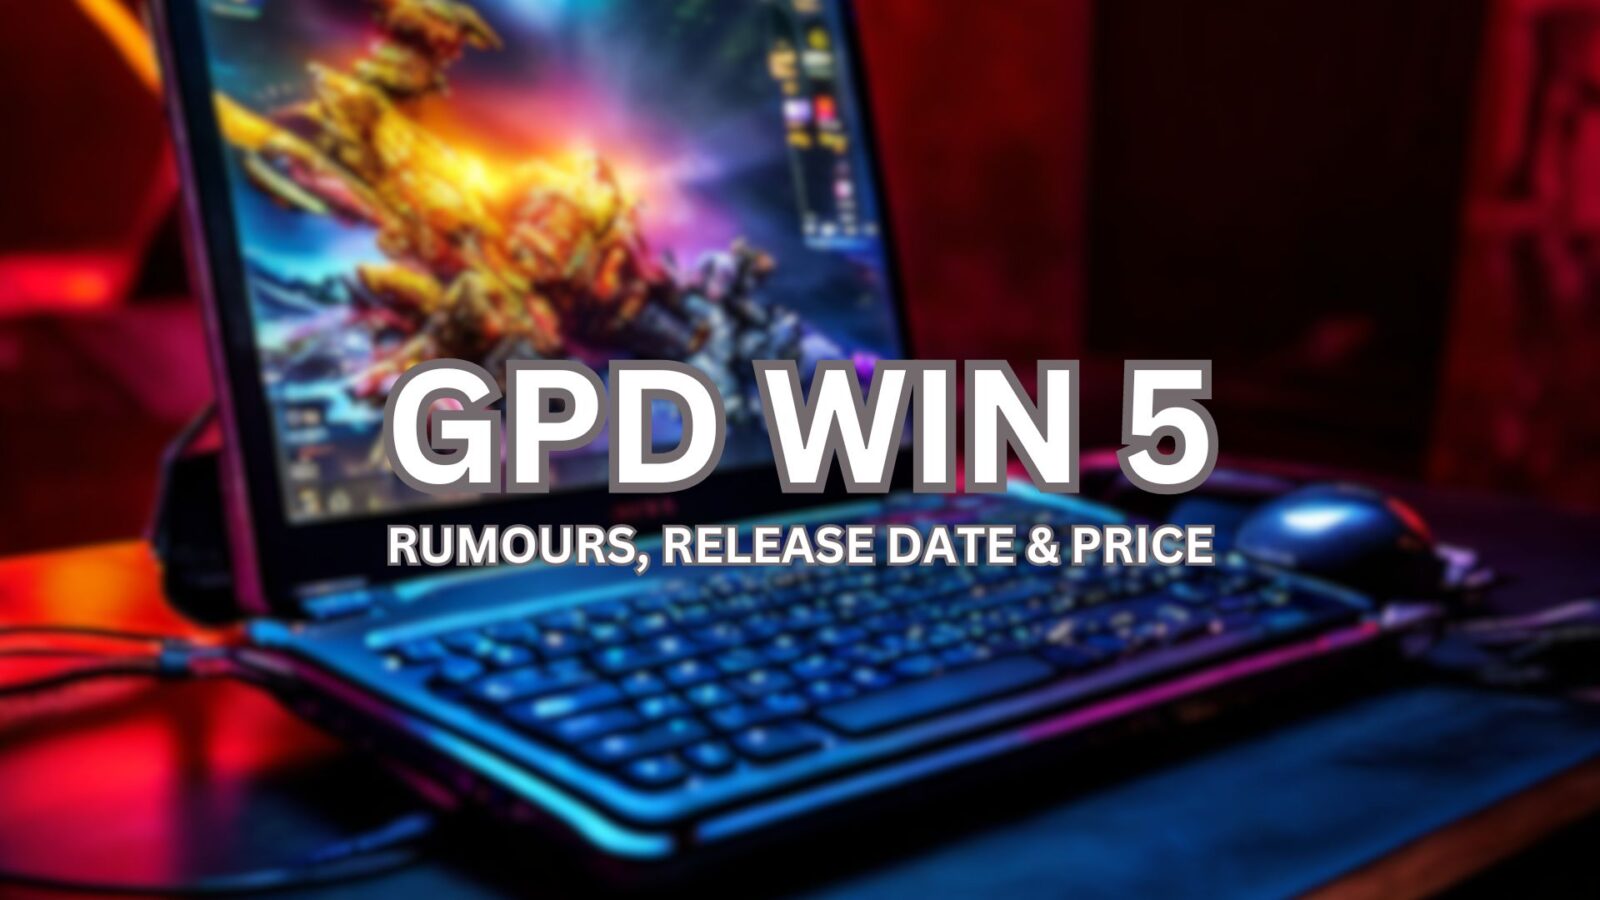 GPD WIN 5 Rumours Release Date and Price